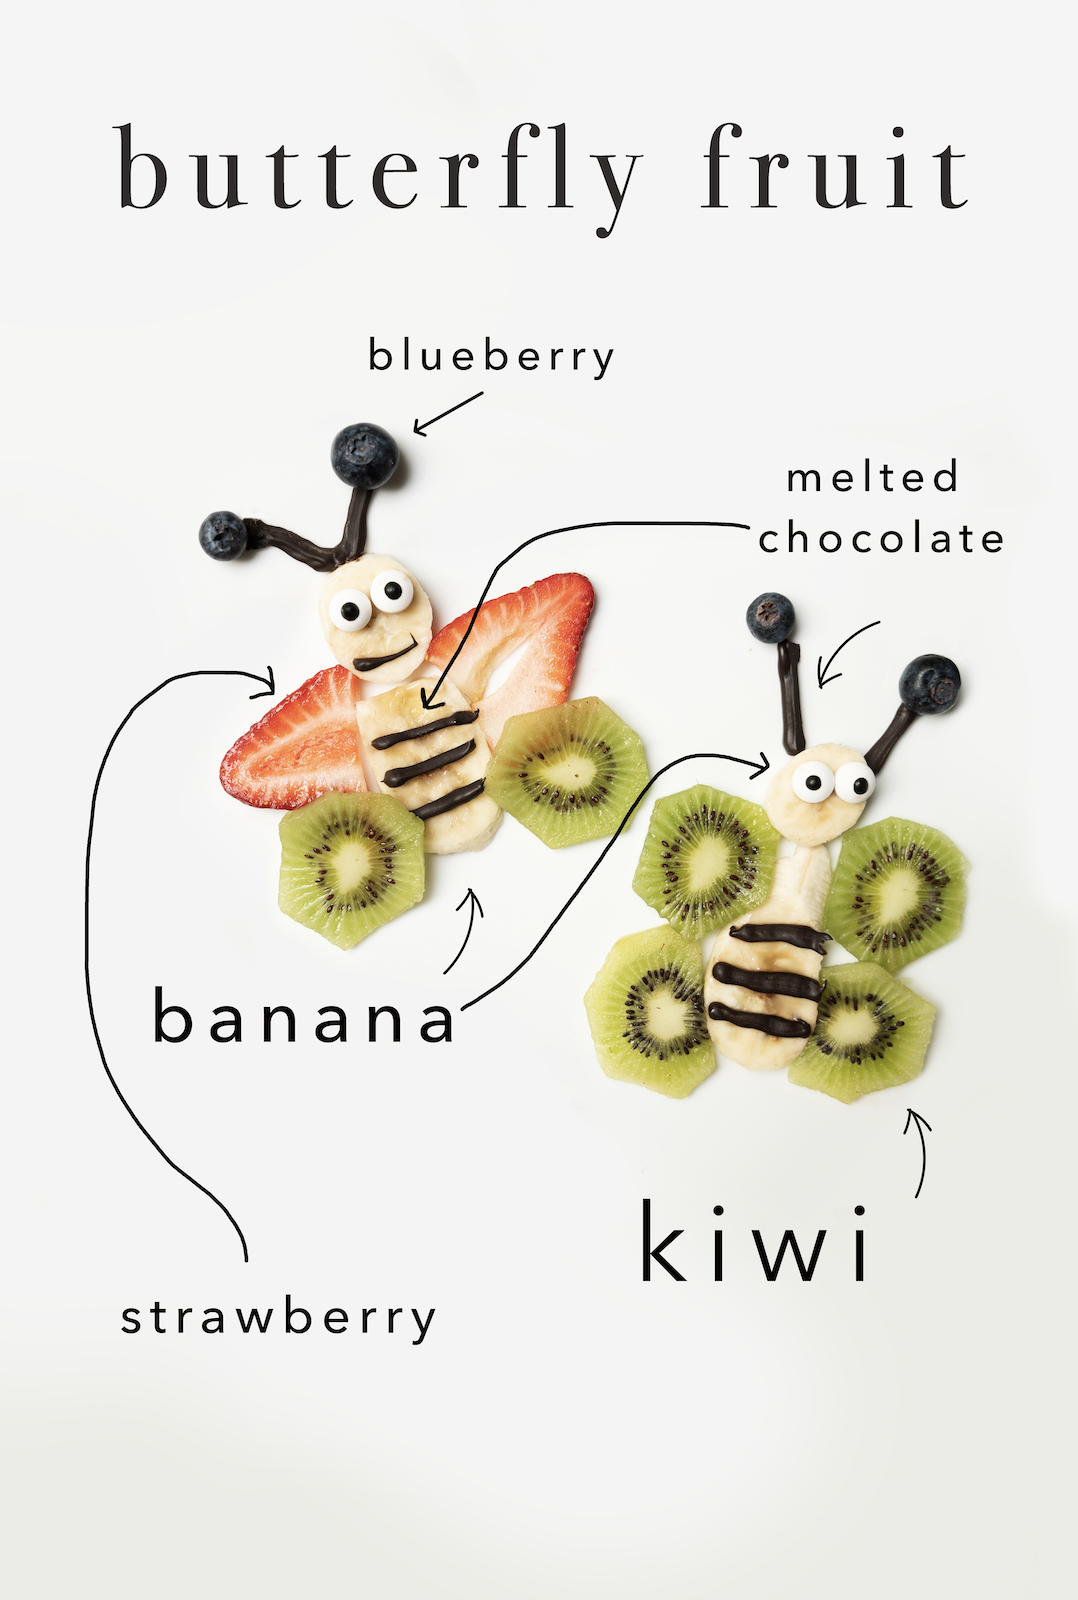 Butterfly Fruit Art with ingredients listed